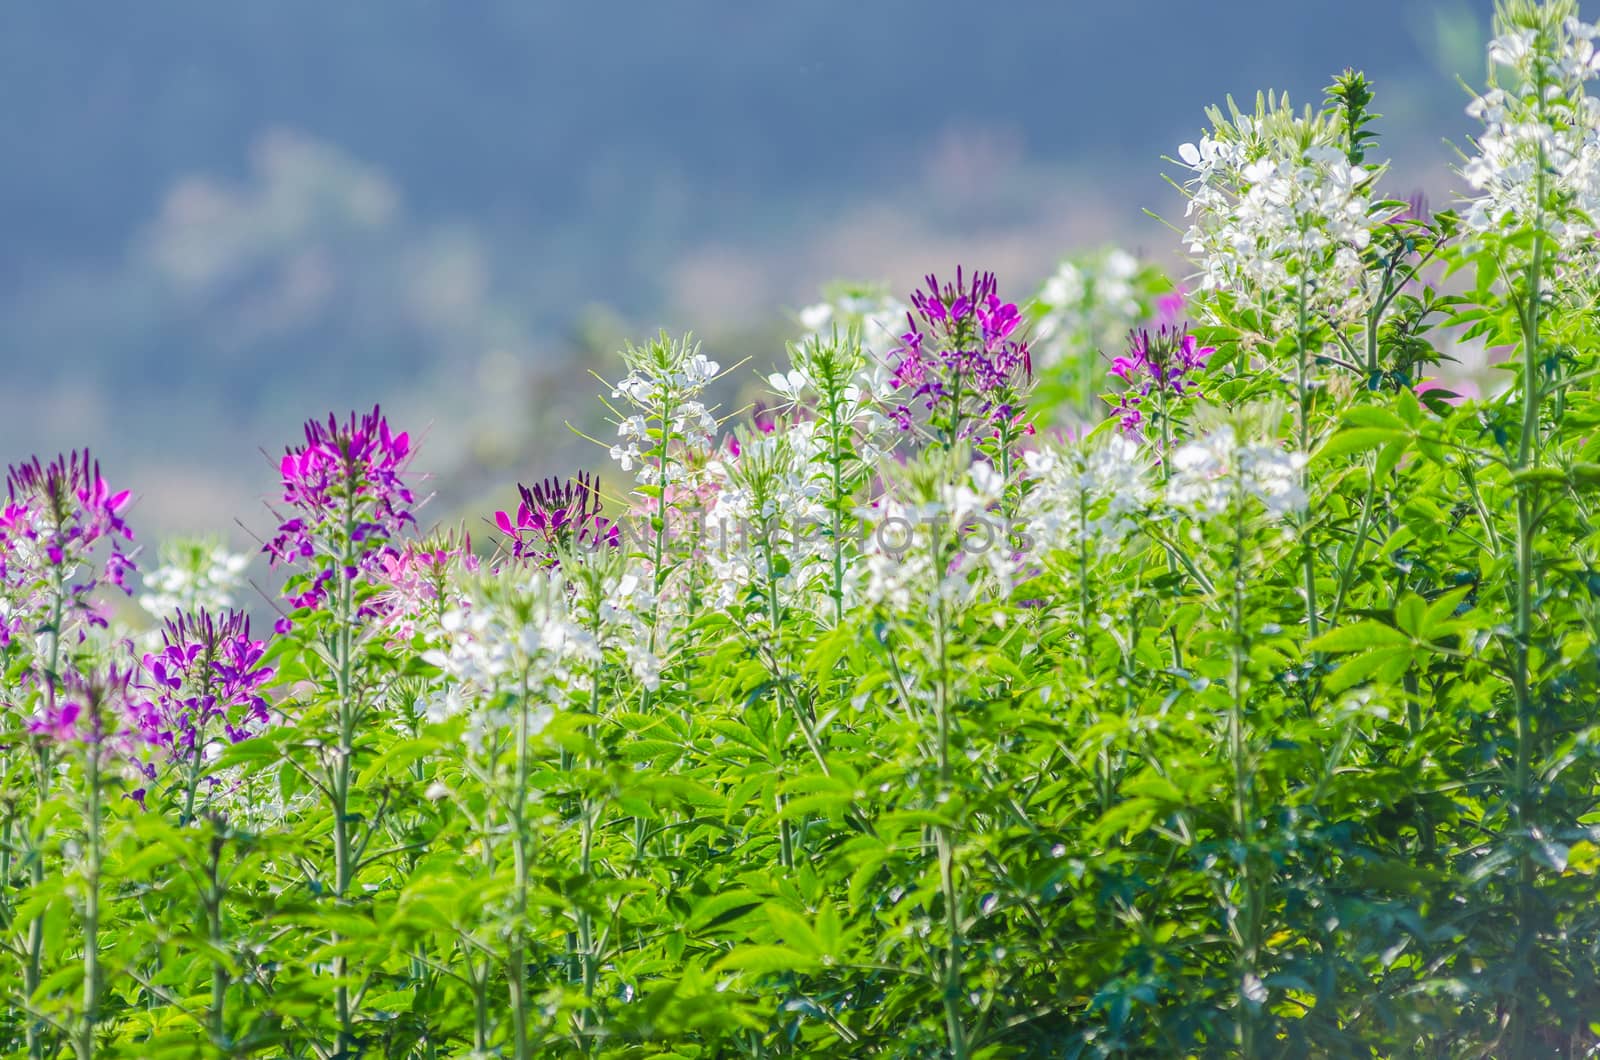 Purple and white flowers in the field with blurred backgroud